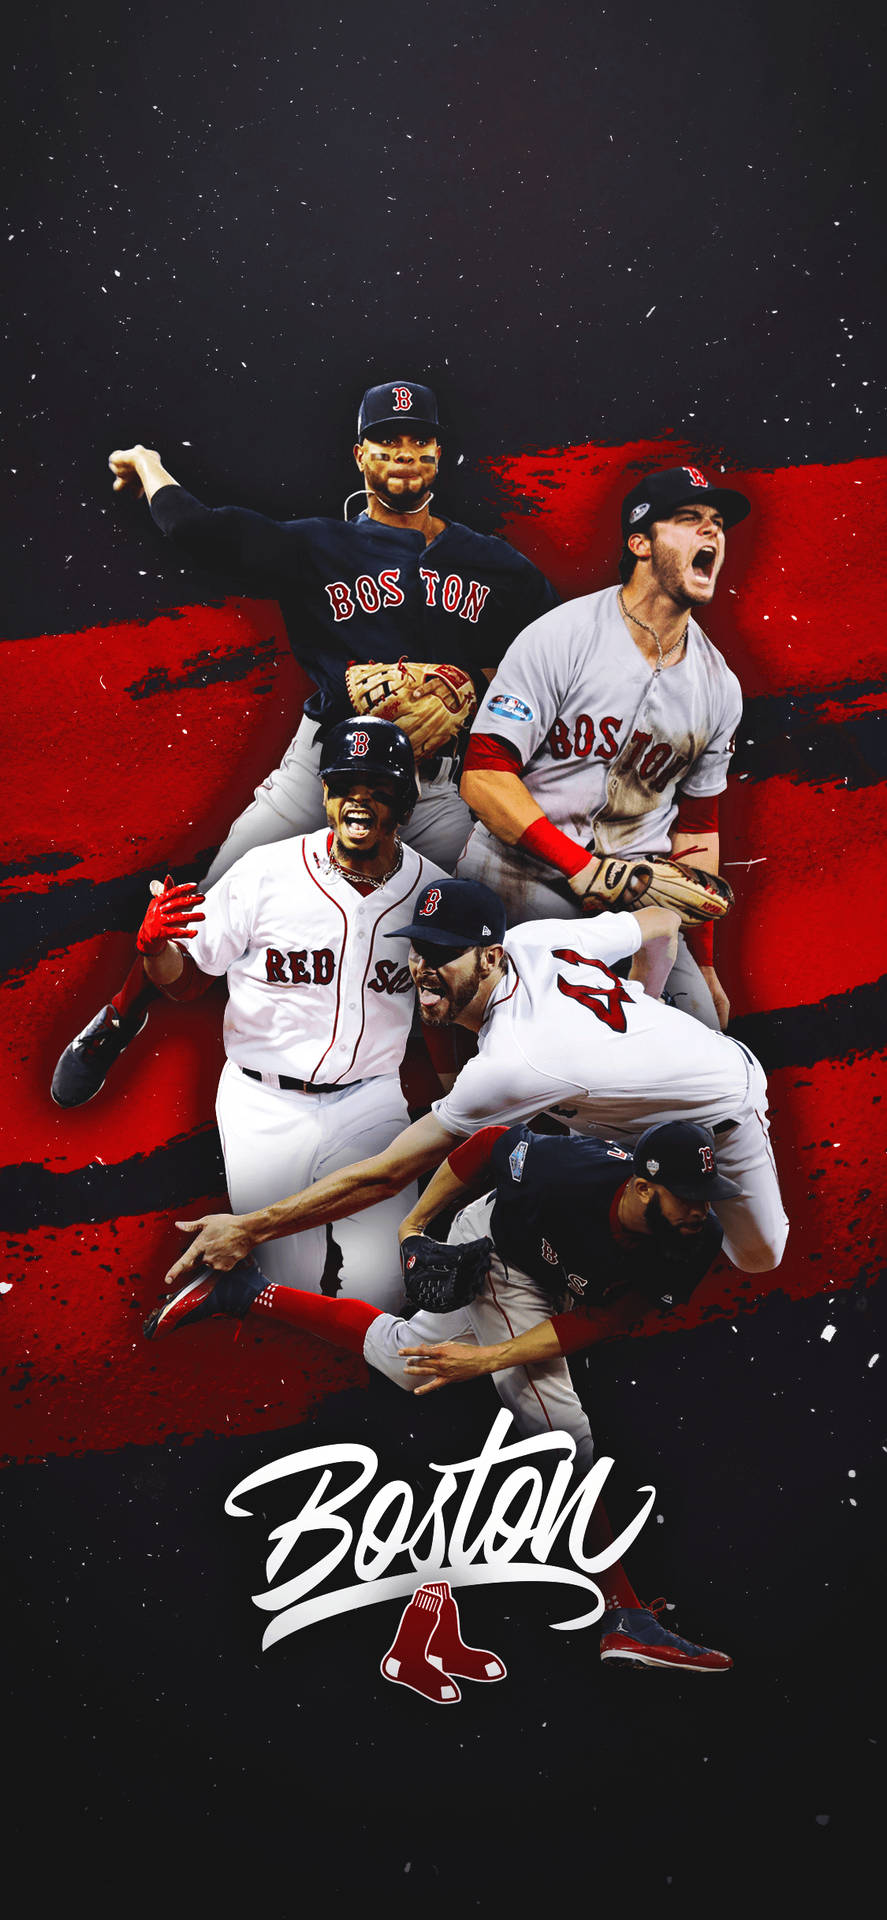 Boston Red Sox Star Players